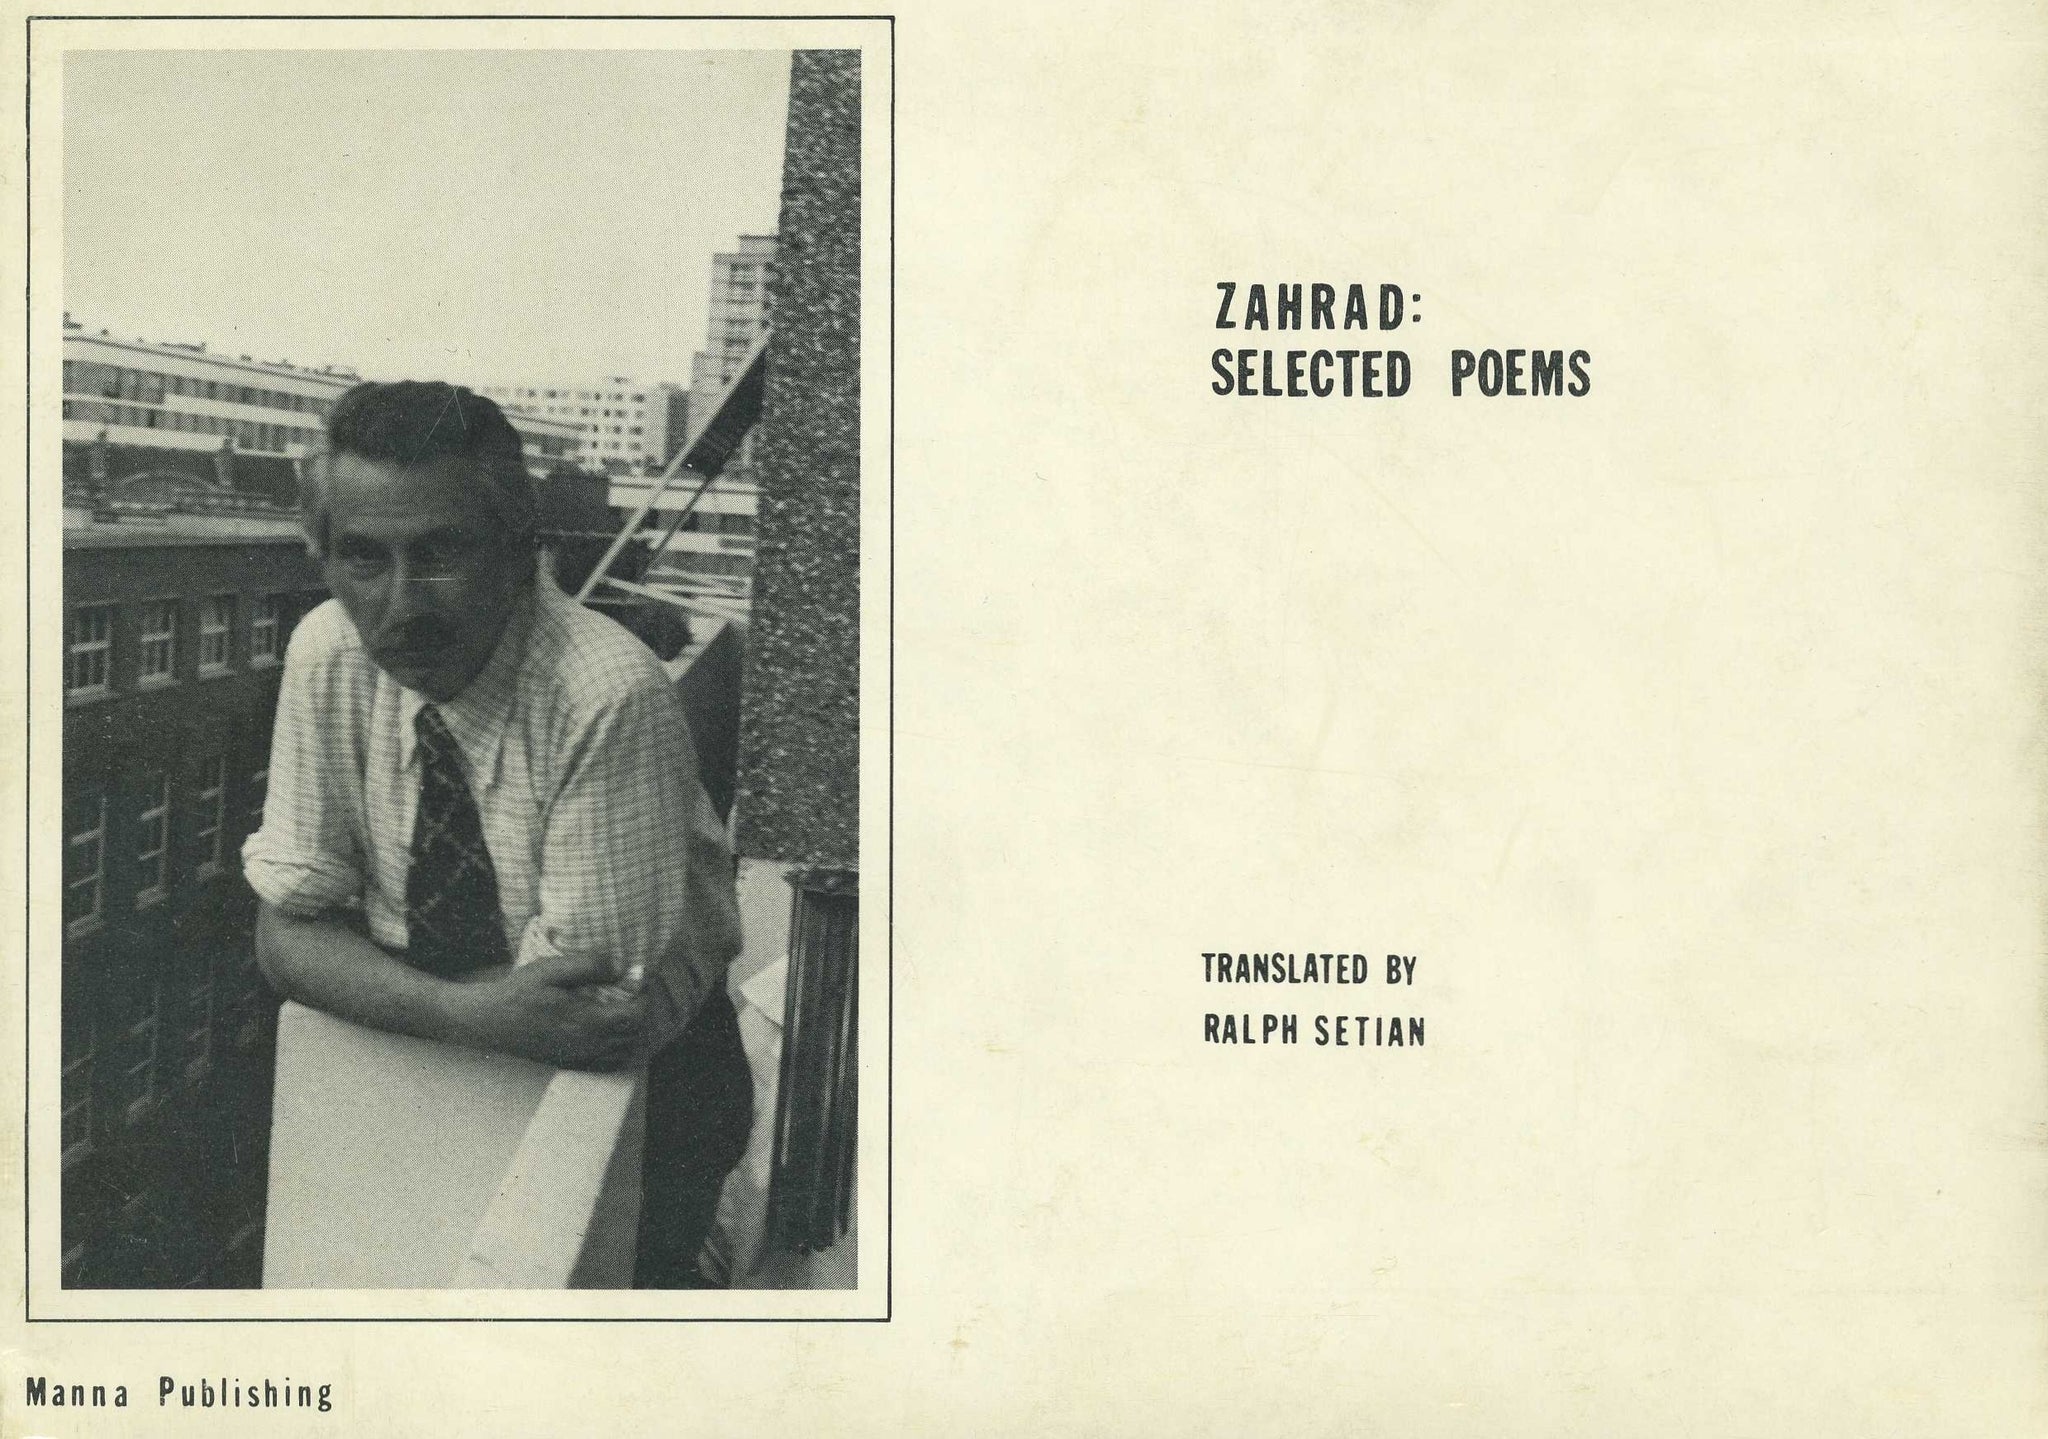 ZAHRAD: SELECTED POEMS